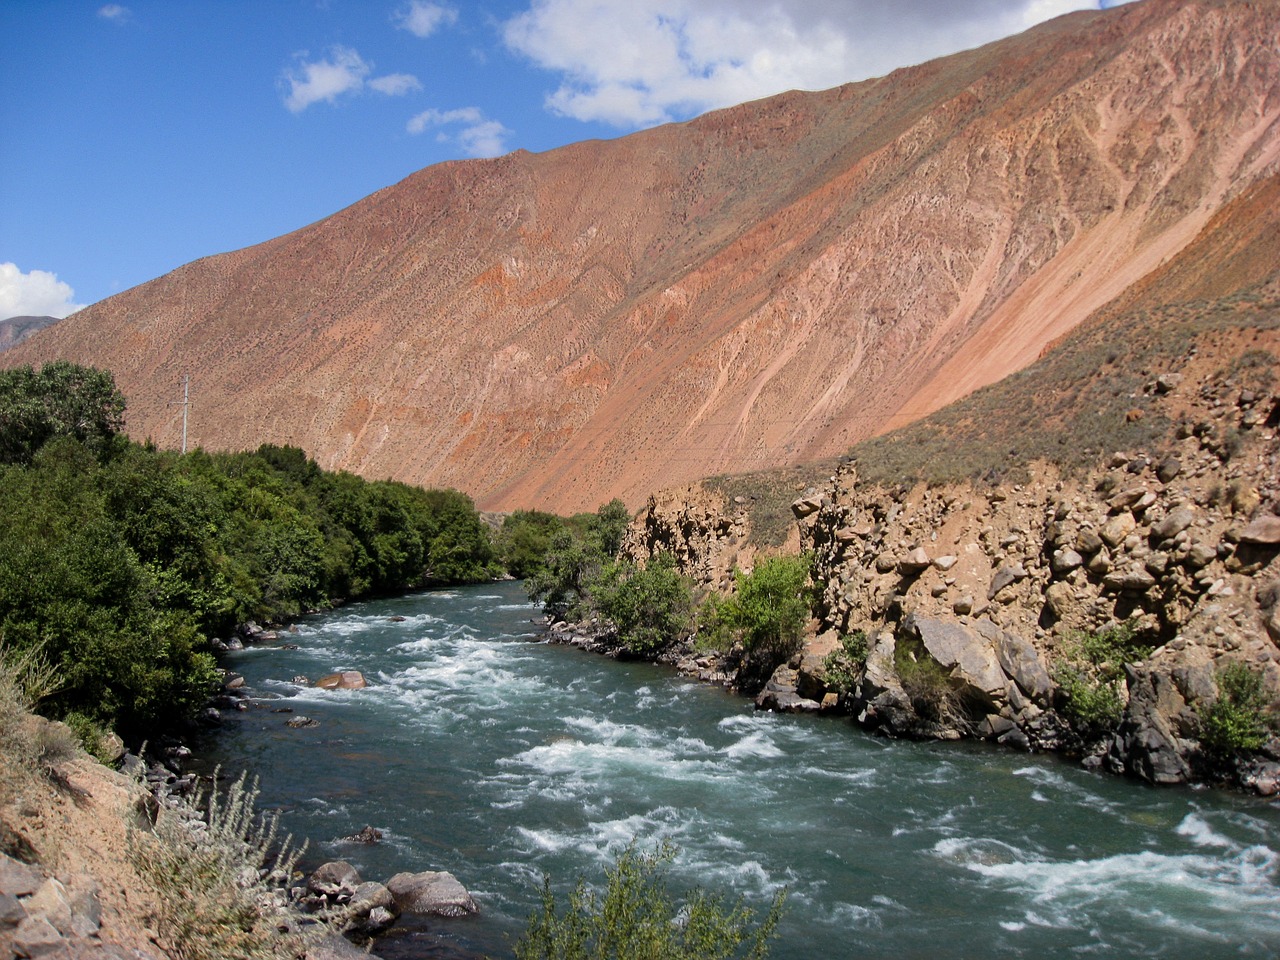 kyrgyzstan torrent current free photo